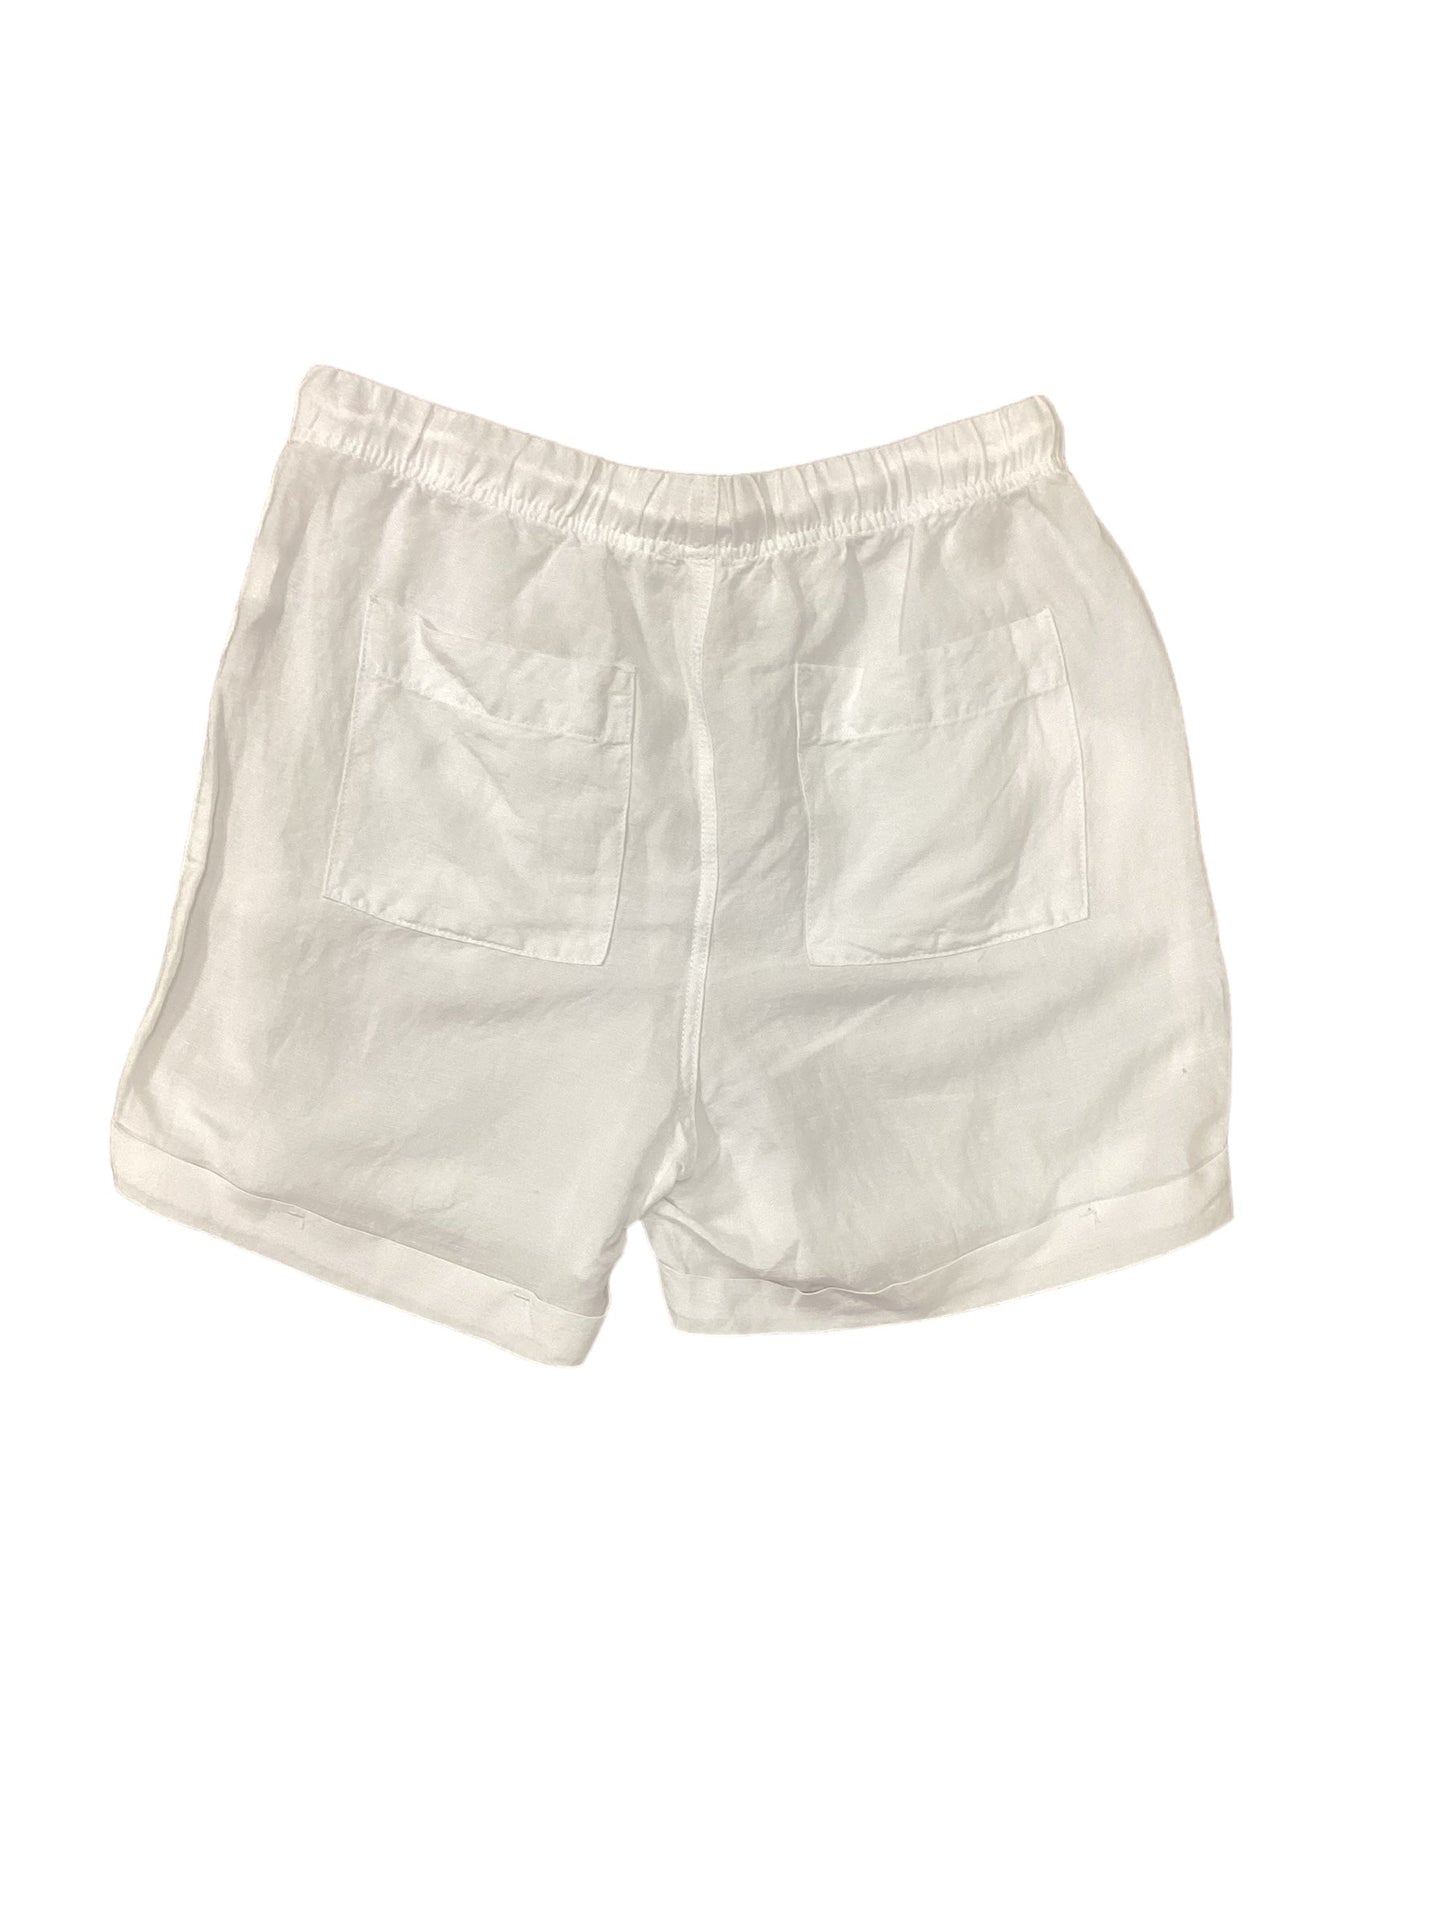 Shorts By Tribal  Size: M